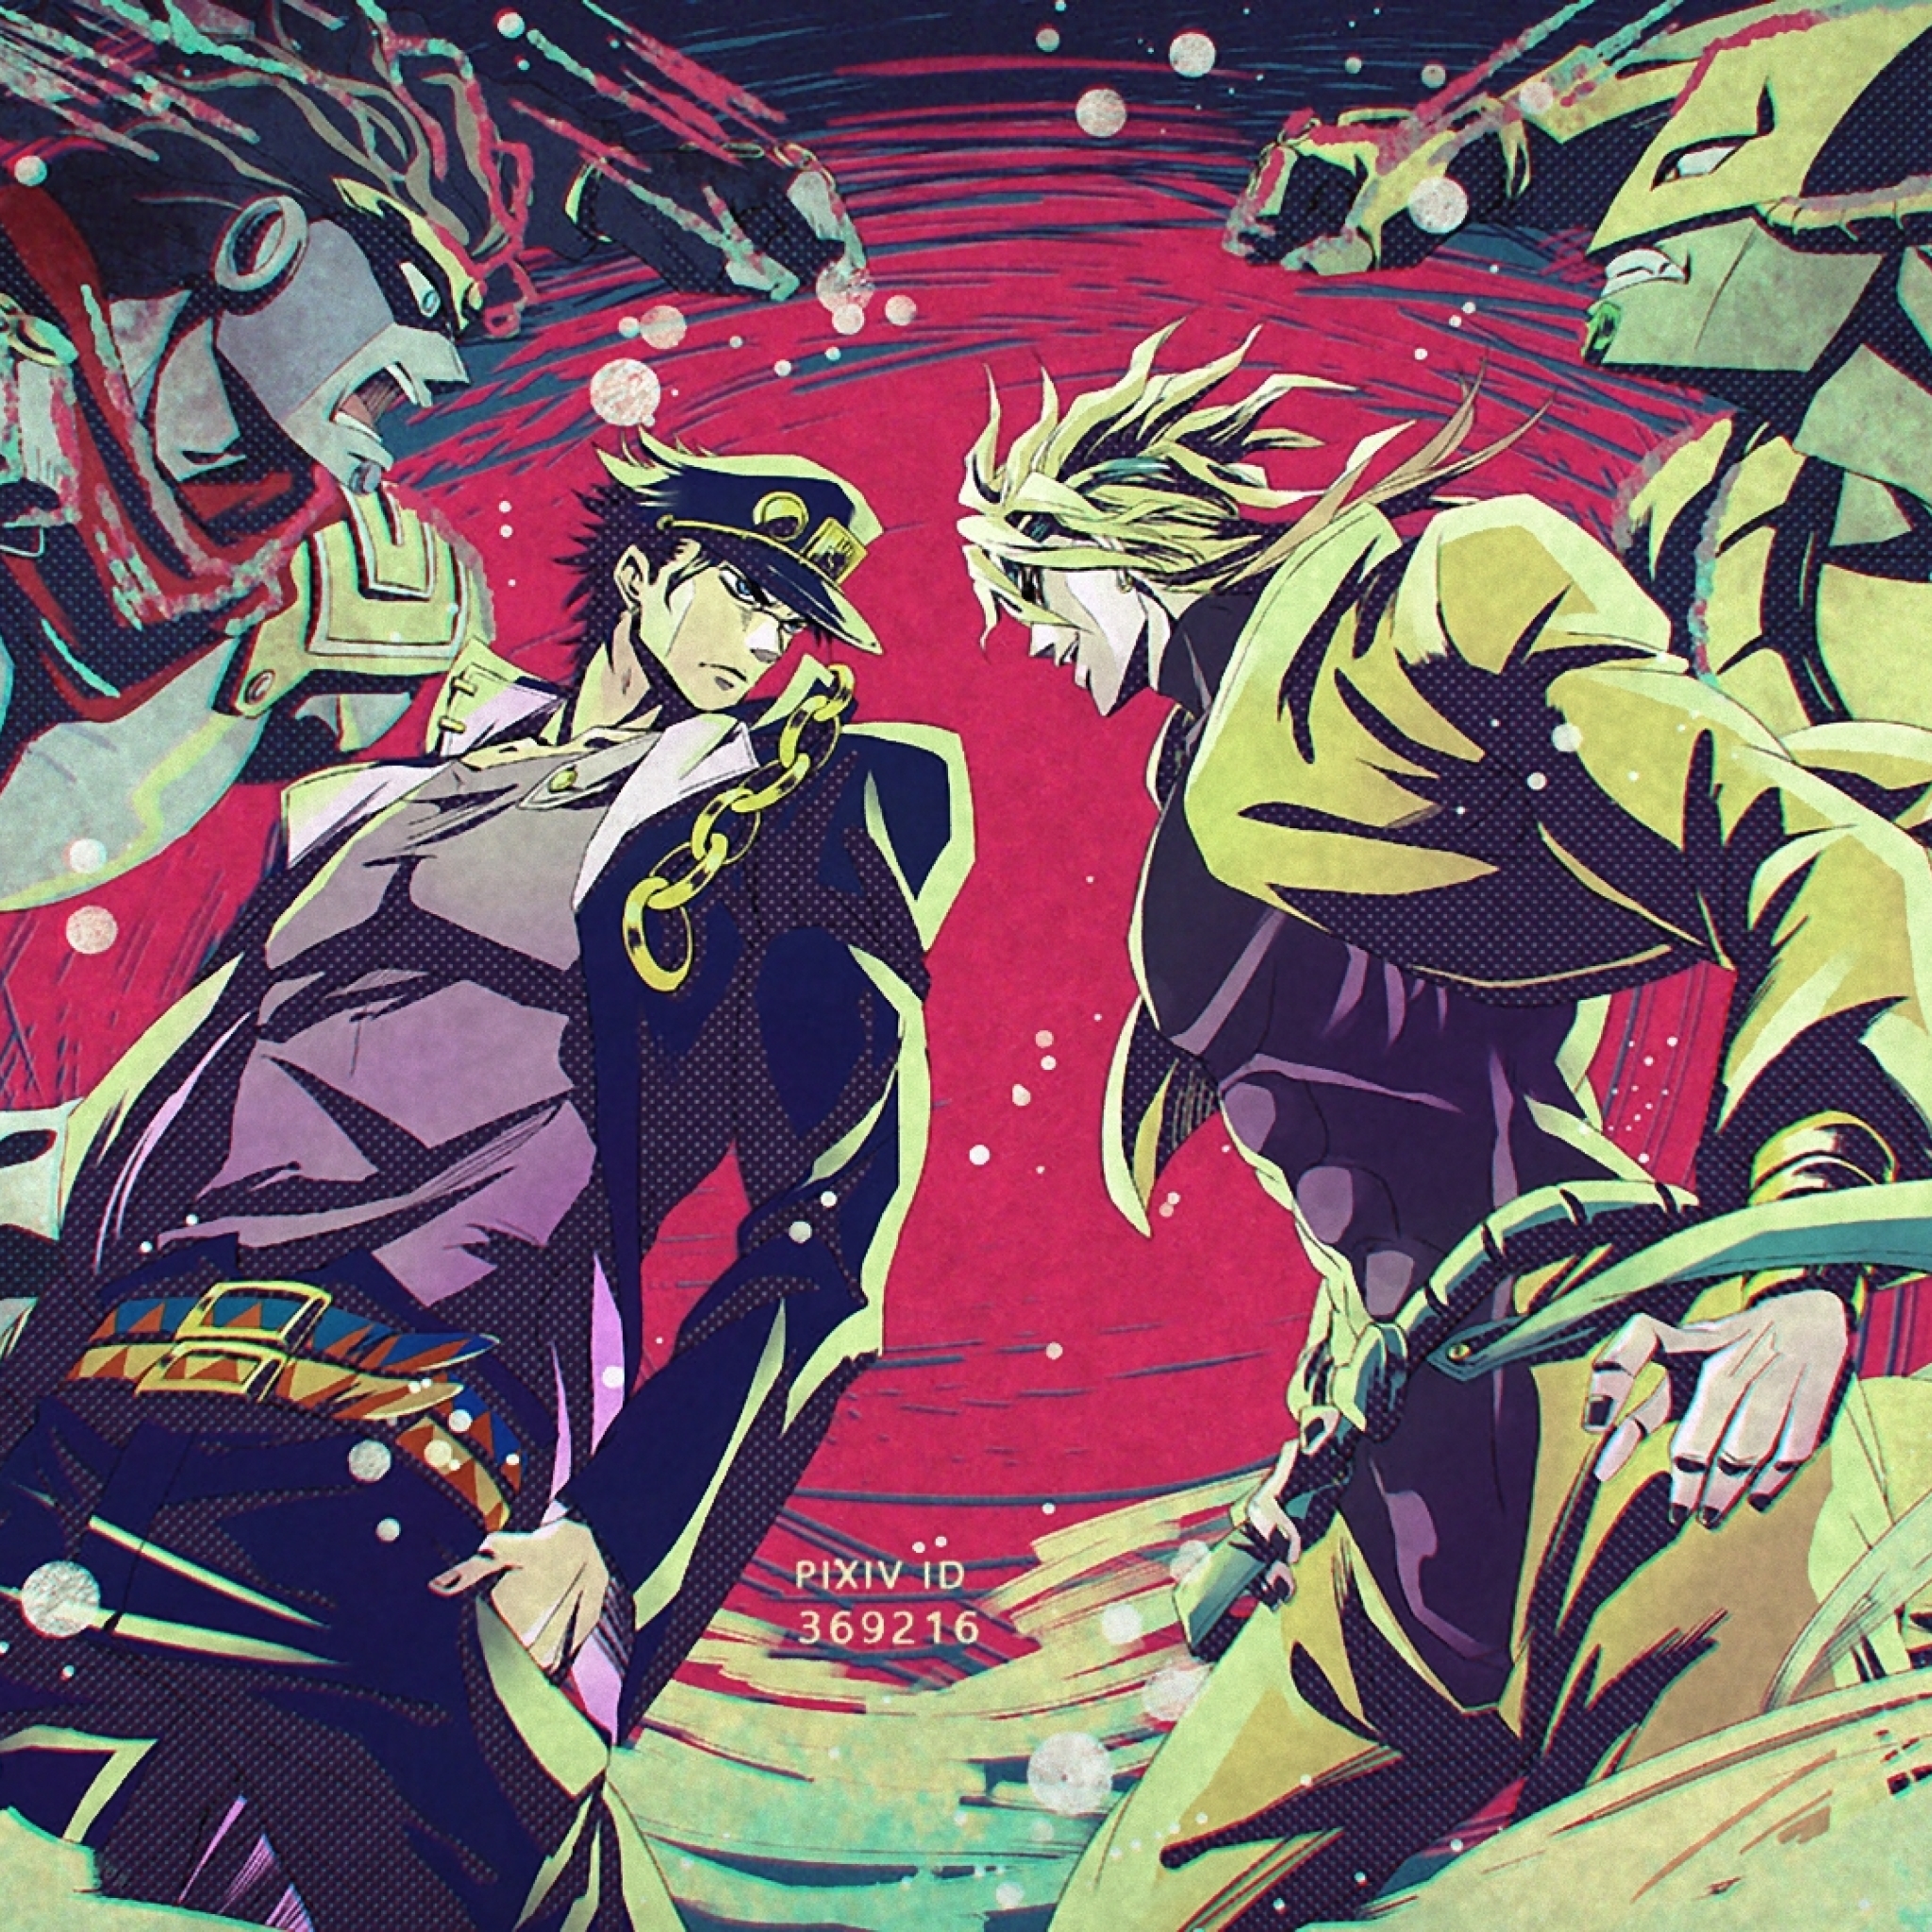 48x48 Jojo S Bizarre Adventure Stardust Crusaders Ipad Air Wallpaper Hd Anime 4k Wallpapers Images Photos And Background